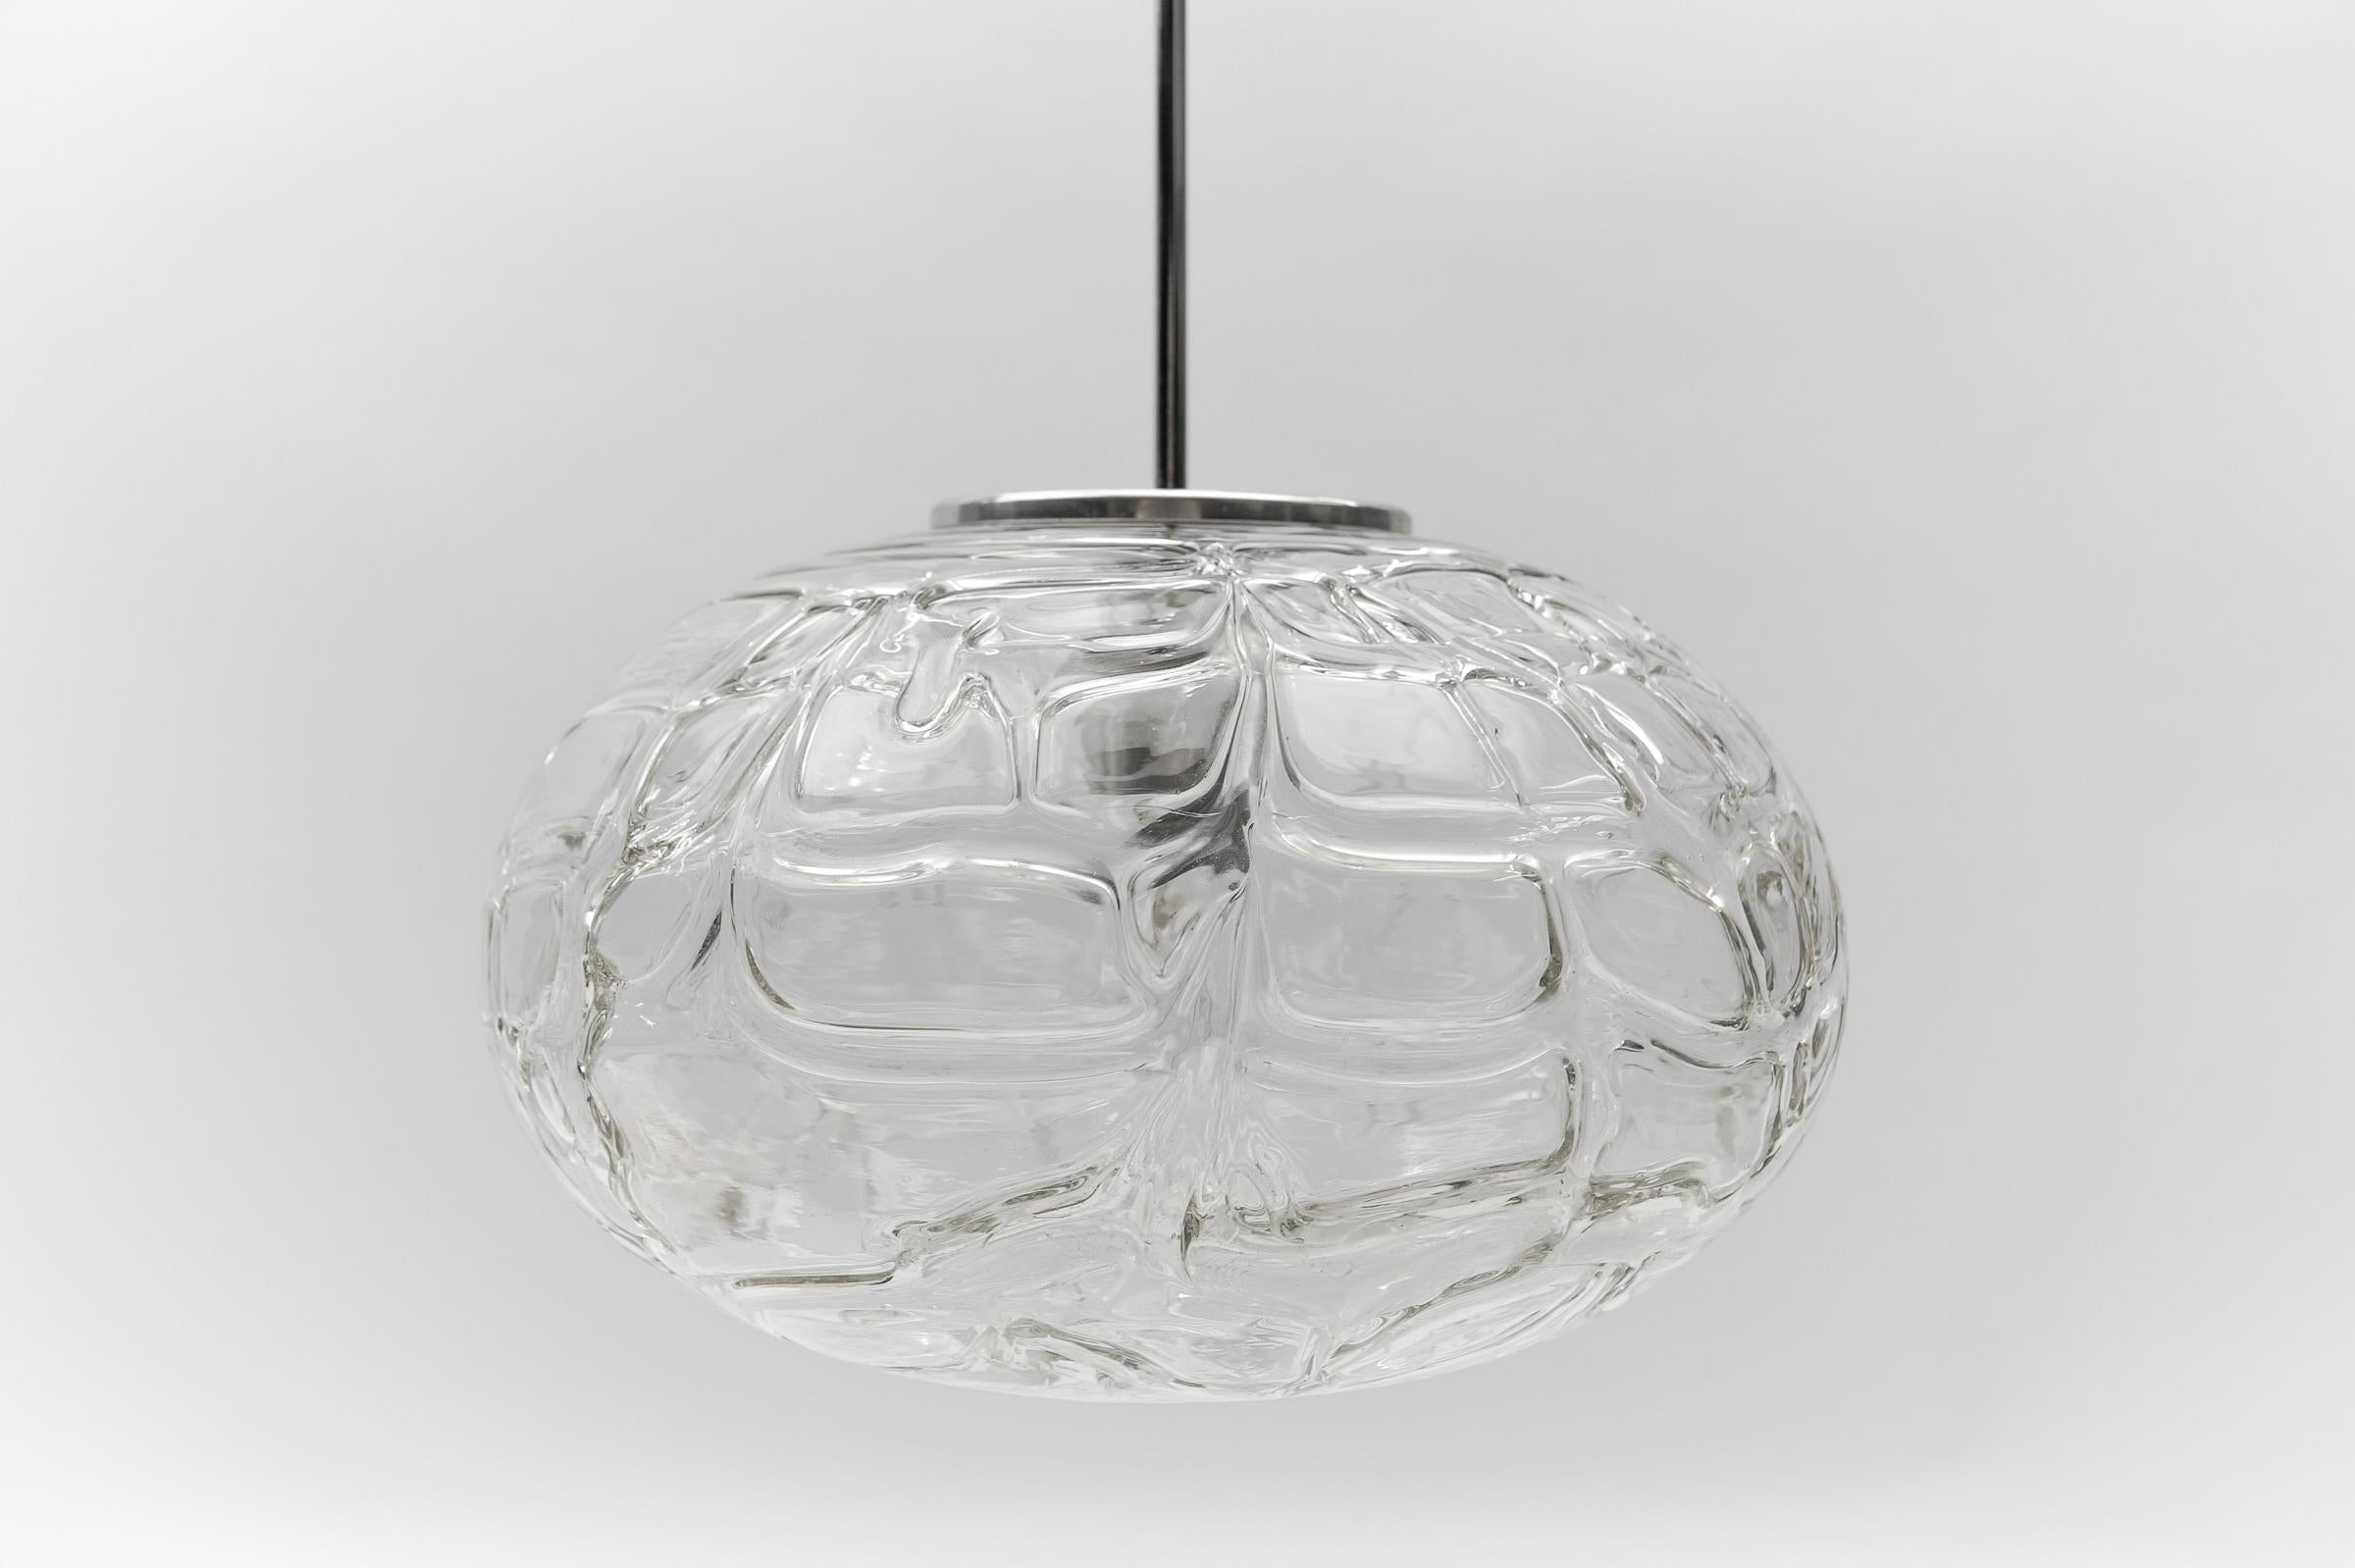 Large Oval Murano Clear Glass Ball Pendant Lamp by Doria, 1960s Germany For Sale 1